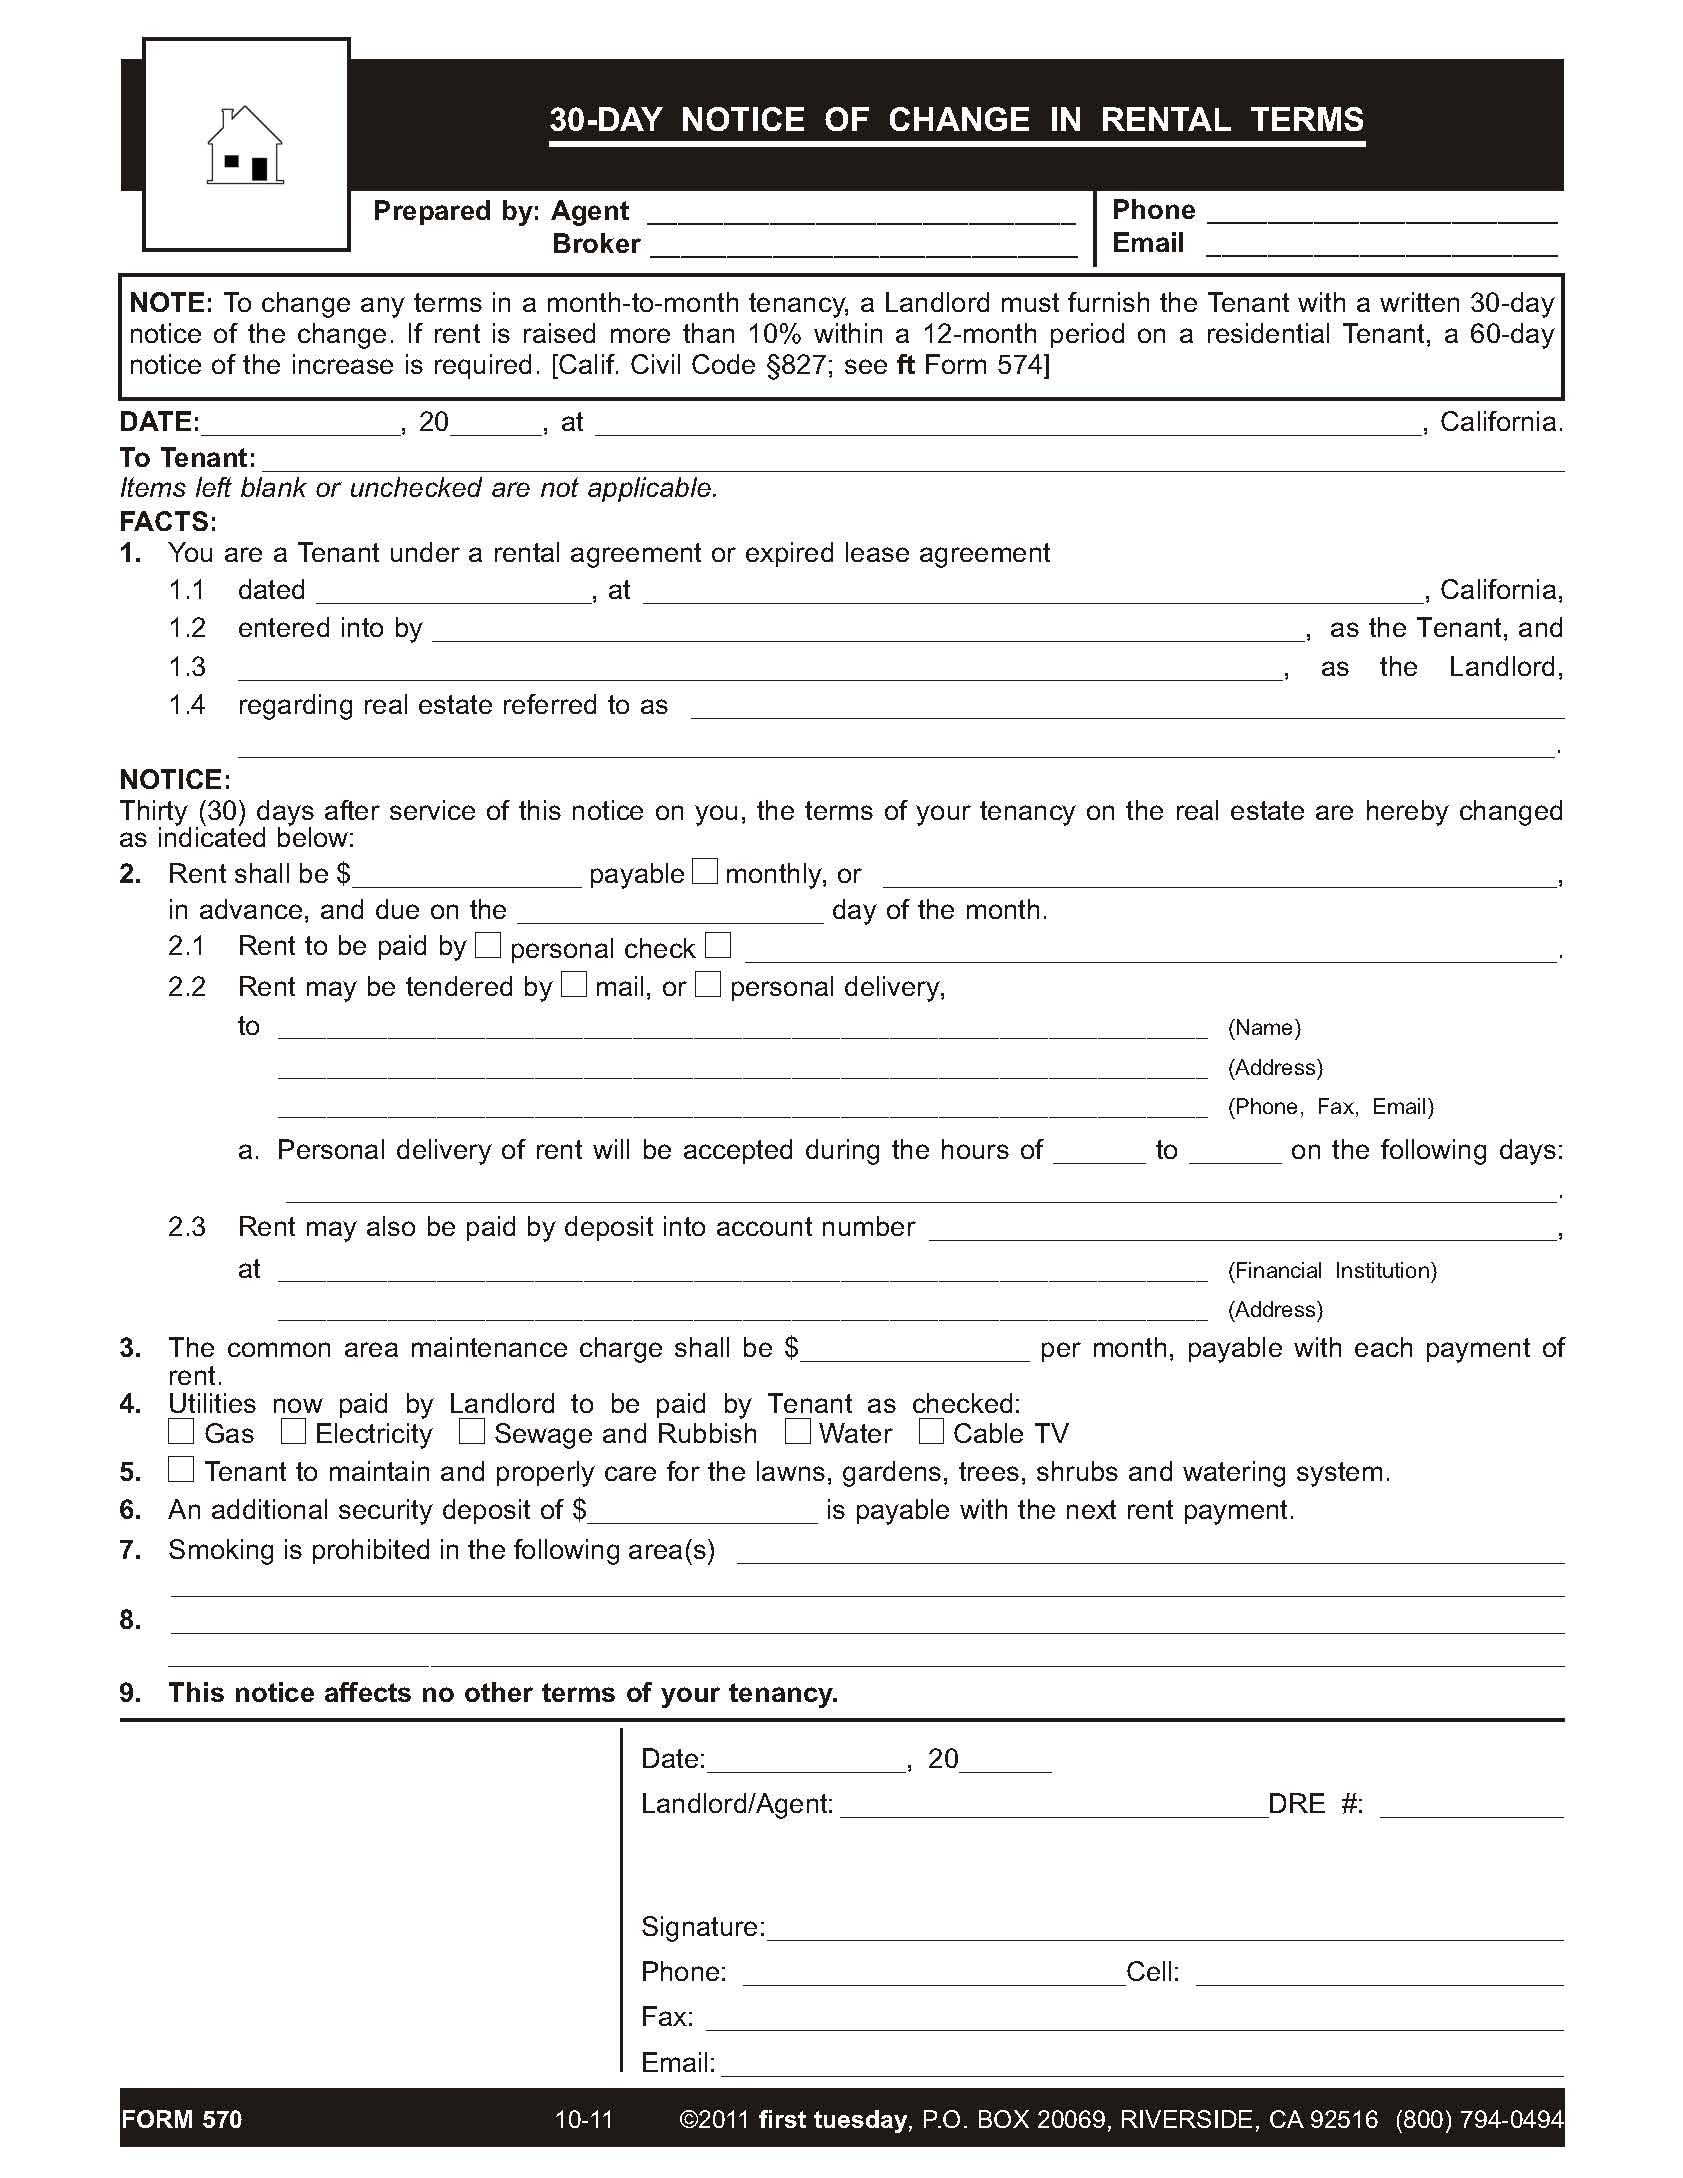 San Francisco Lease Agreement Changing Terms On A Month To Month Tenancy Landlords Notice To